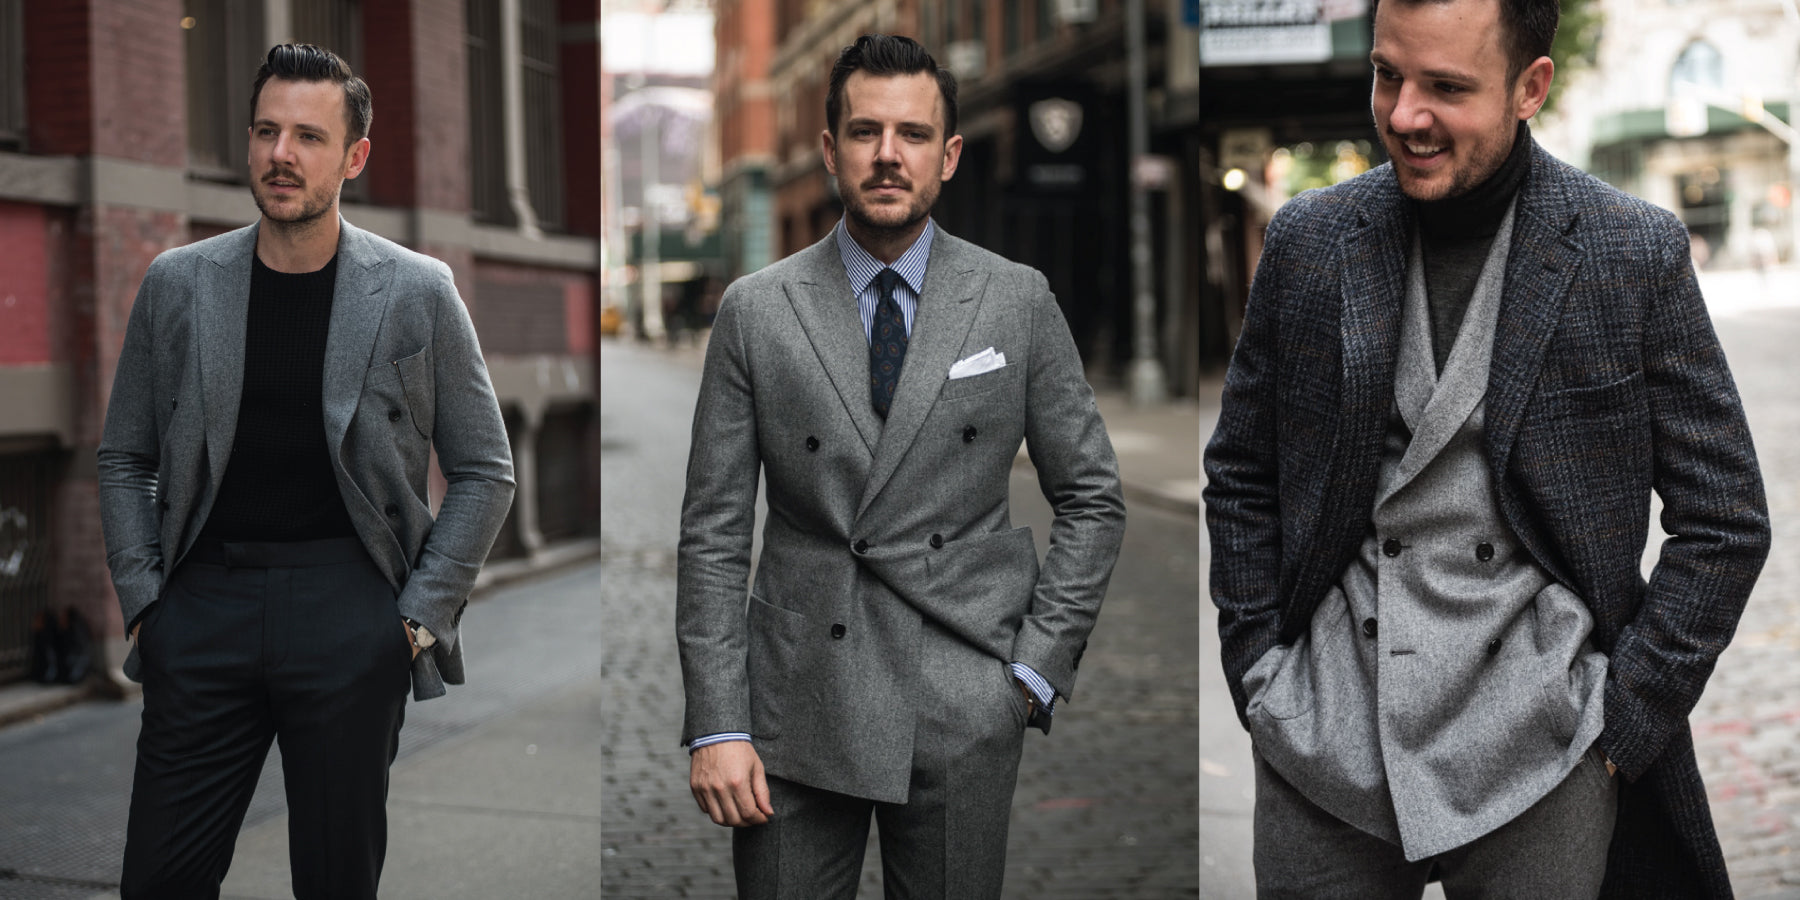 Articles of Style | 1 Piece/3 Ways: Gray Flannel Suit